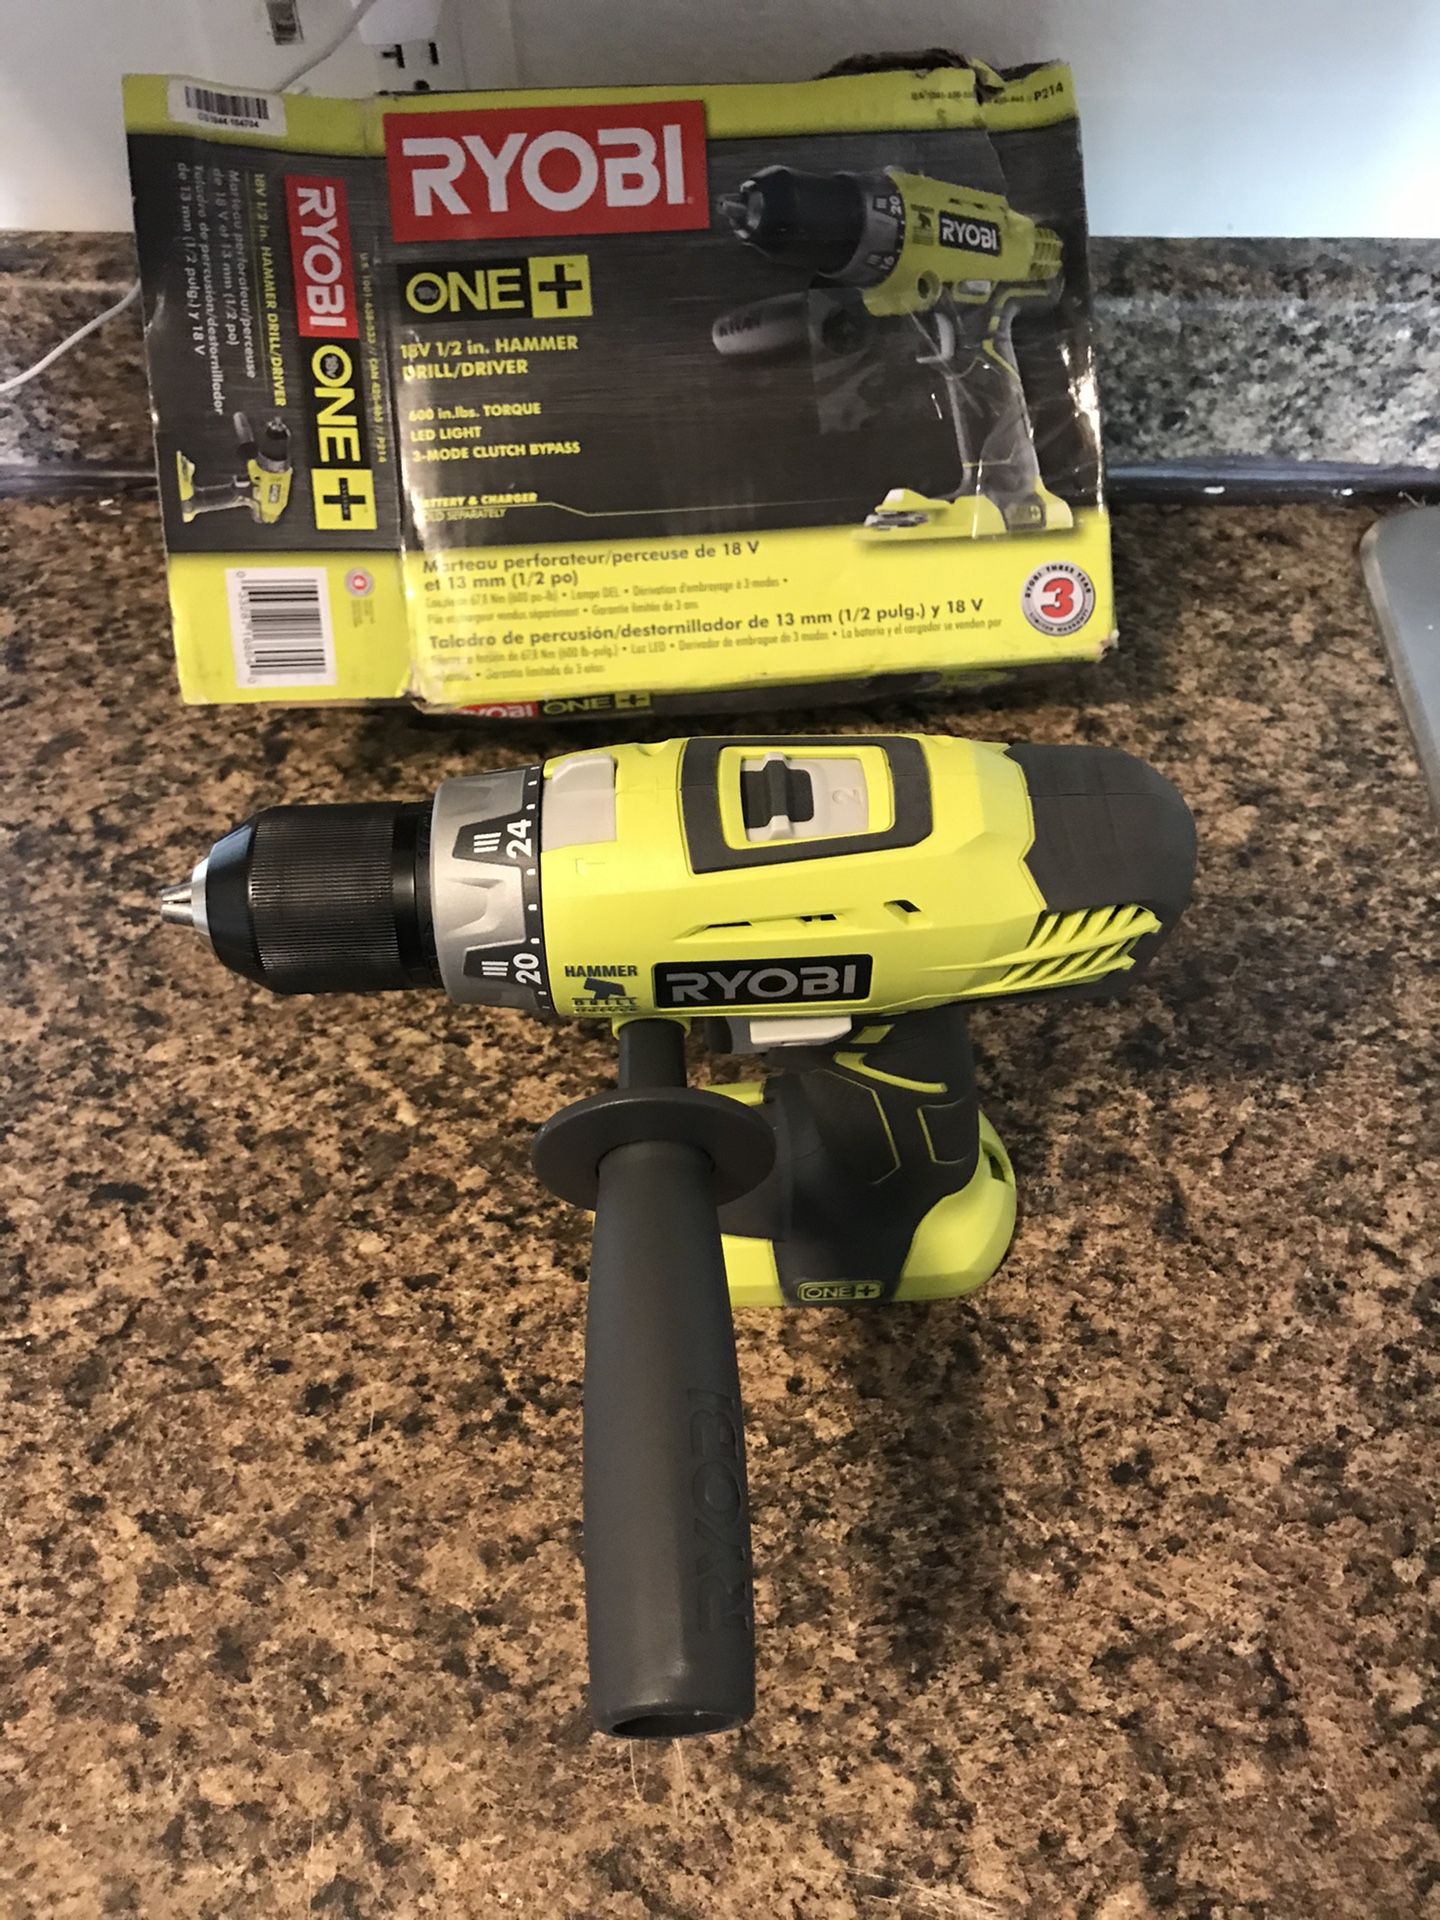 18-Volt ONE+ Cordless 1/2 in. Hammer Drill/Driver (Tool Only) with Handle. New never used.